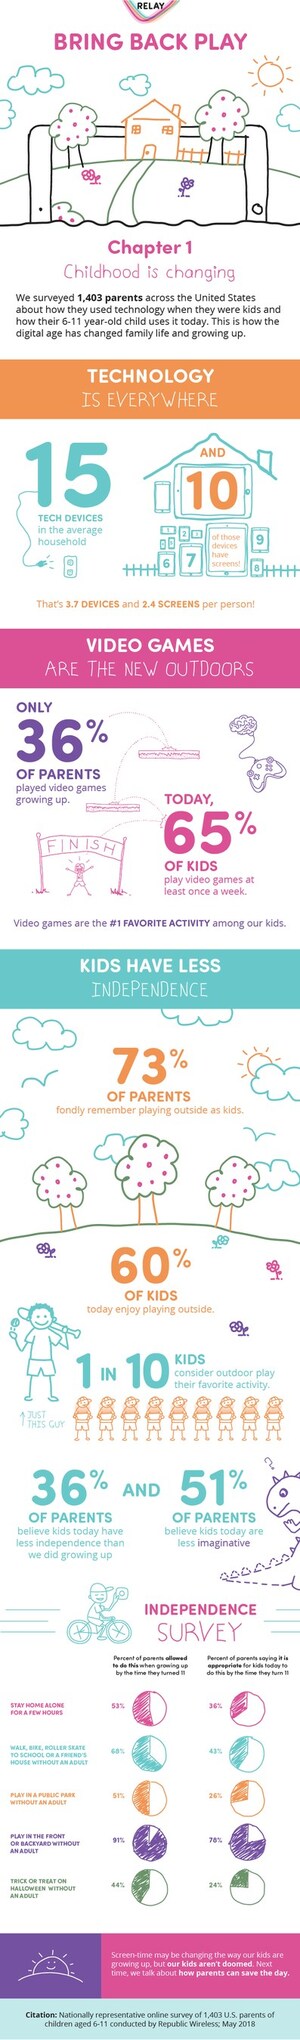 Changing Childhood: "Bring Back Play" Study From Relay Shows Family Life is Suffering from Screen Overload